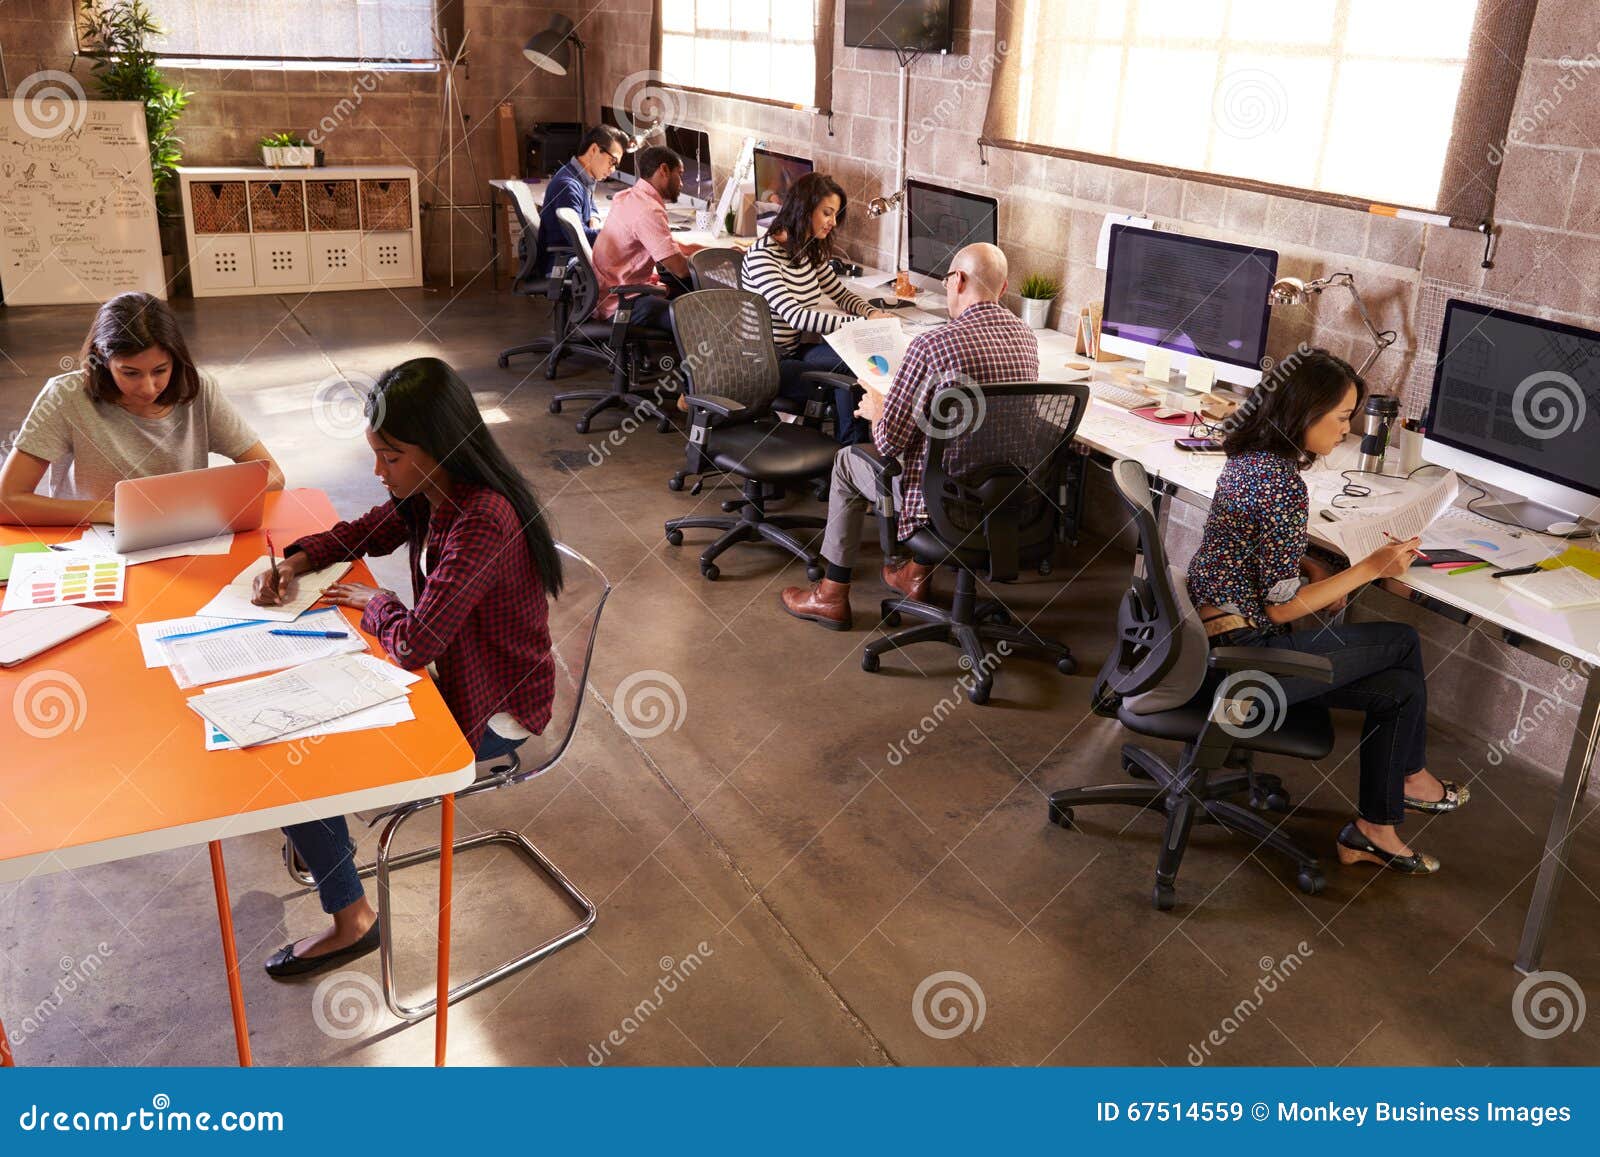 elevated view of people working in modern  office